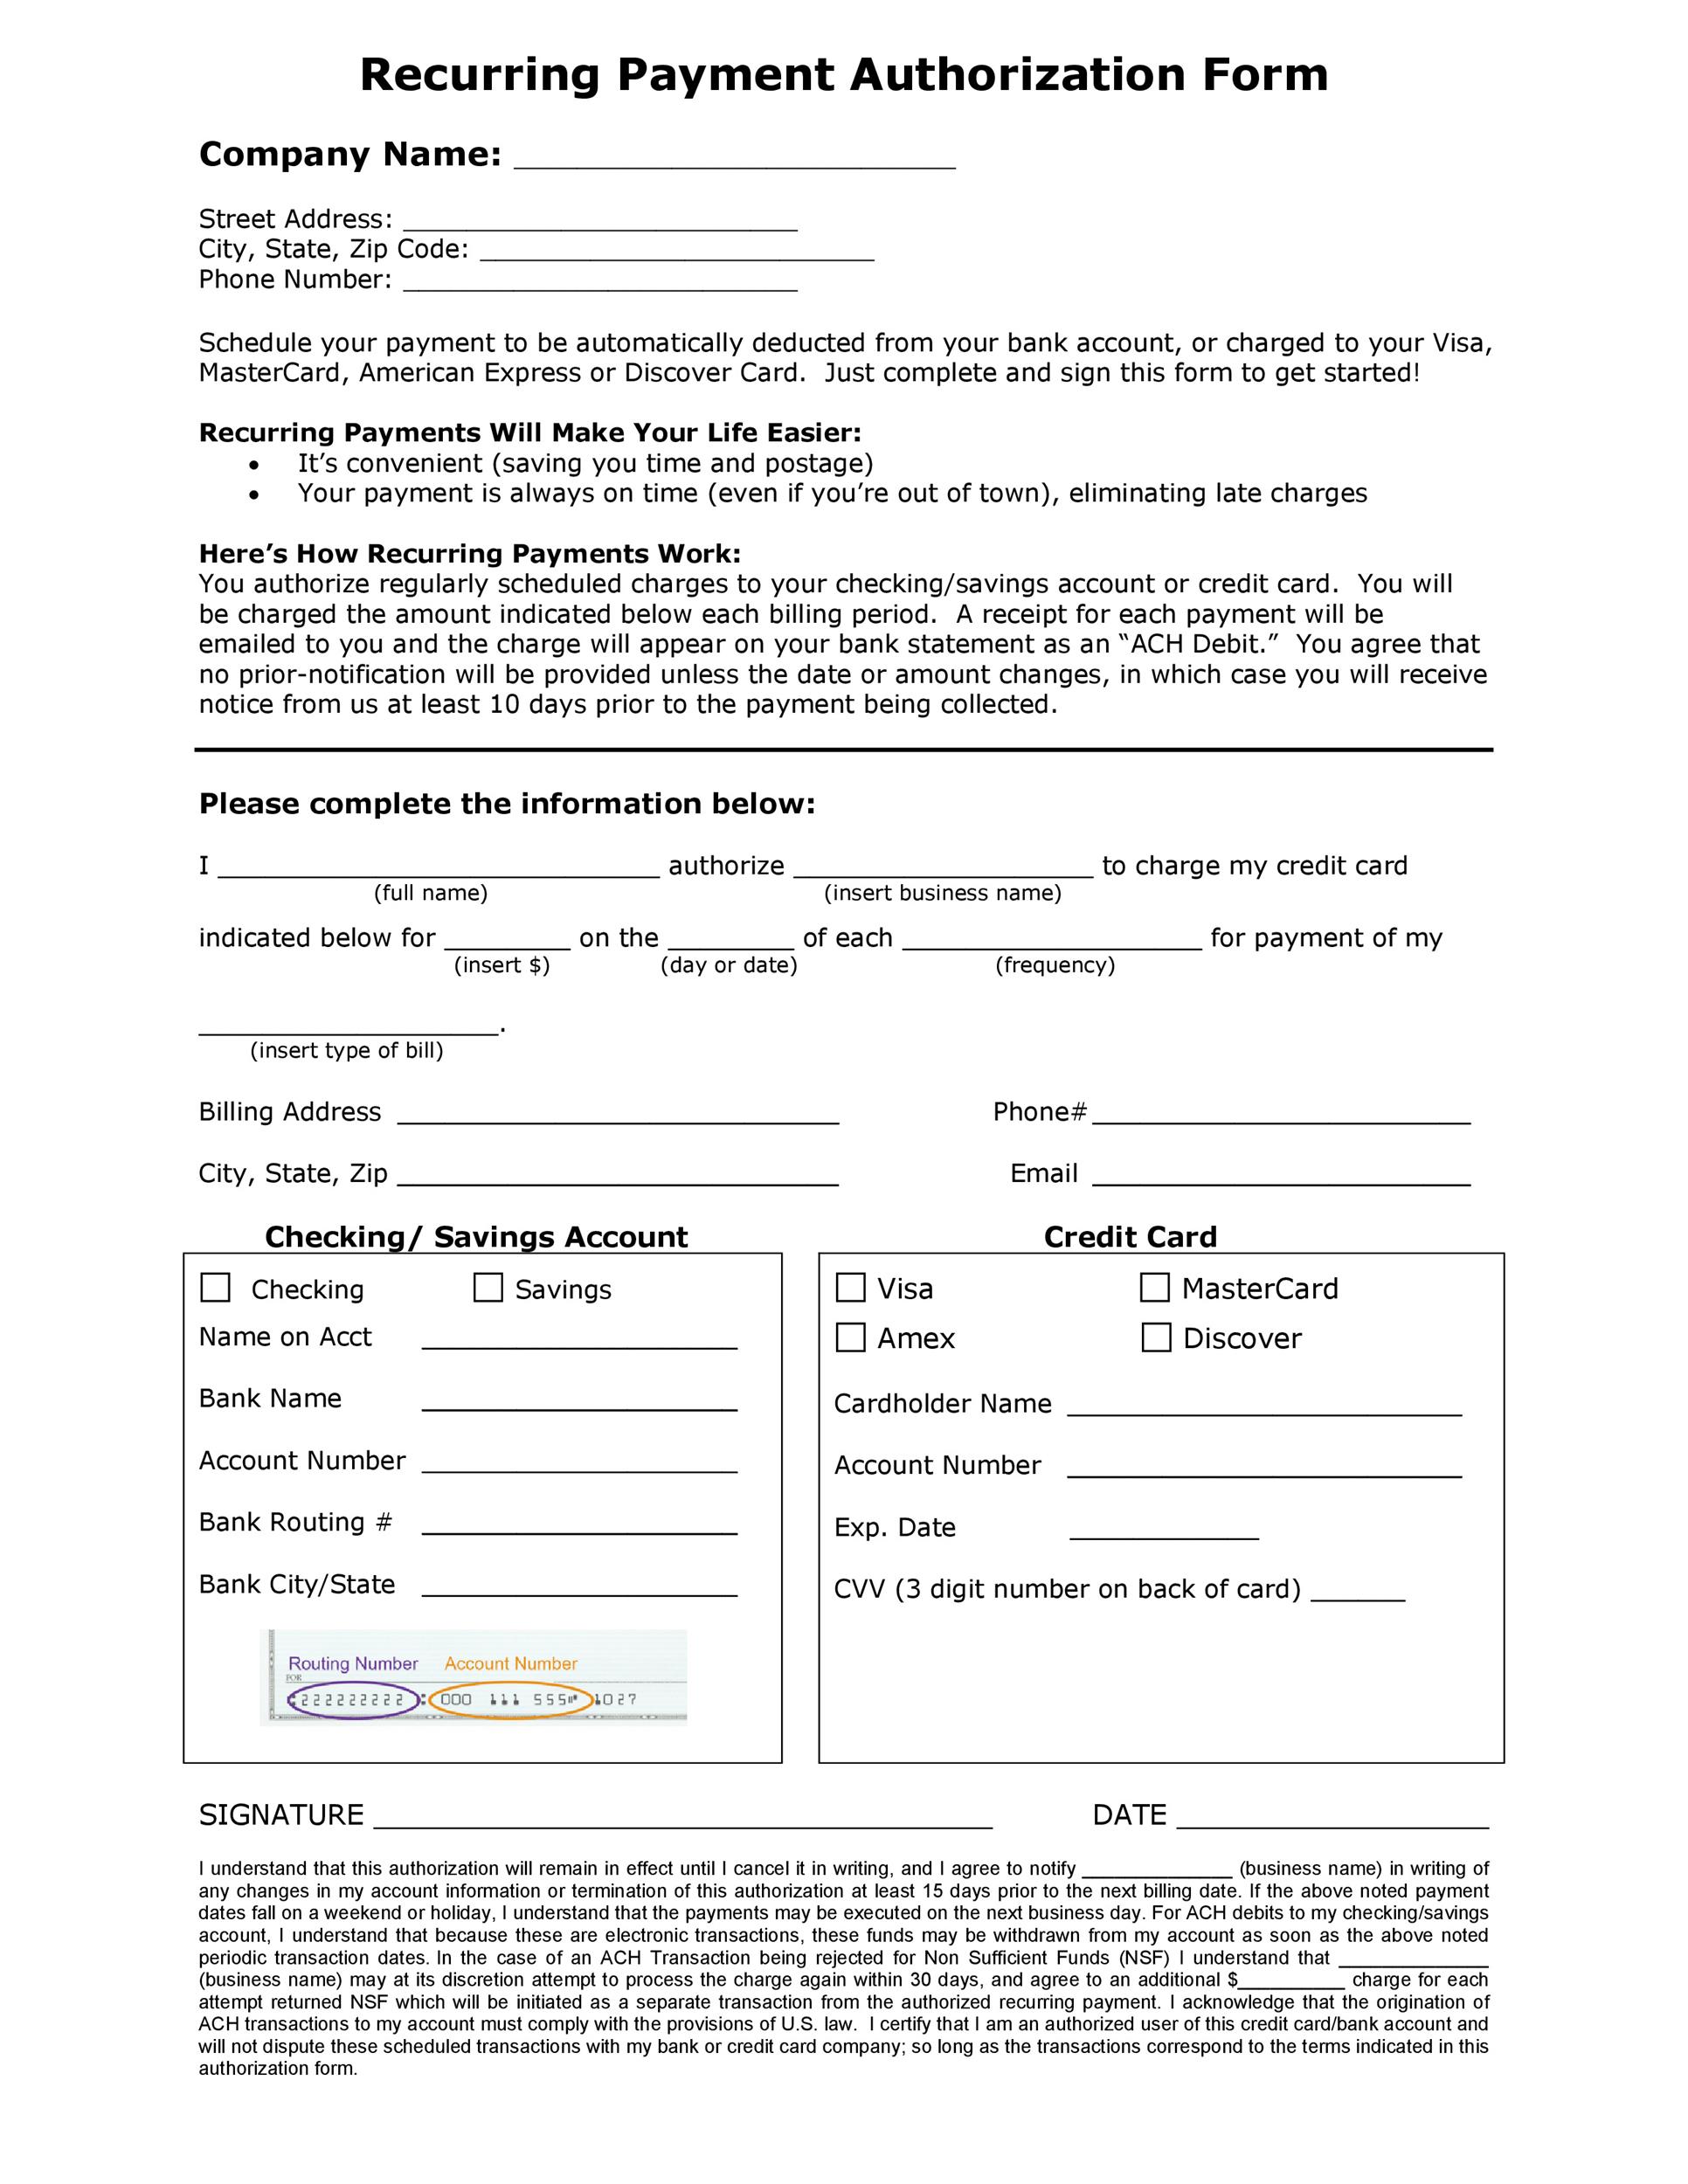 Free credit card authorization form template 32